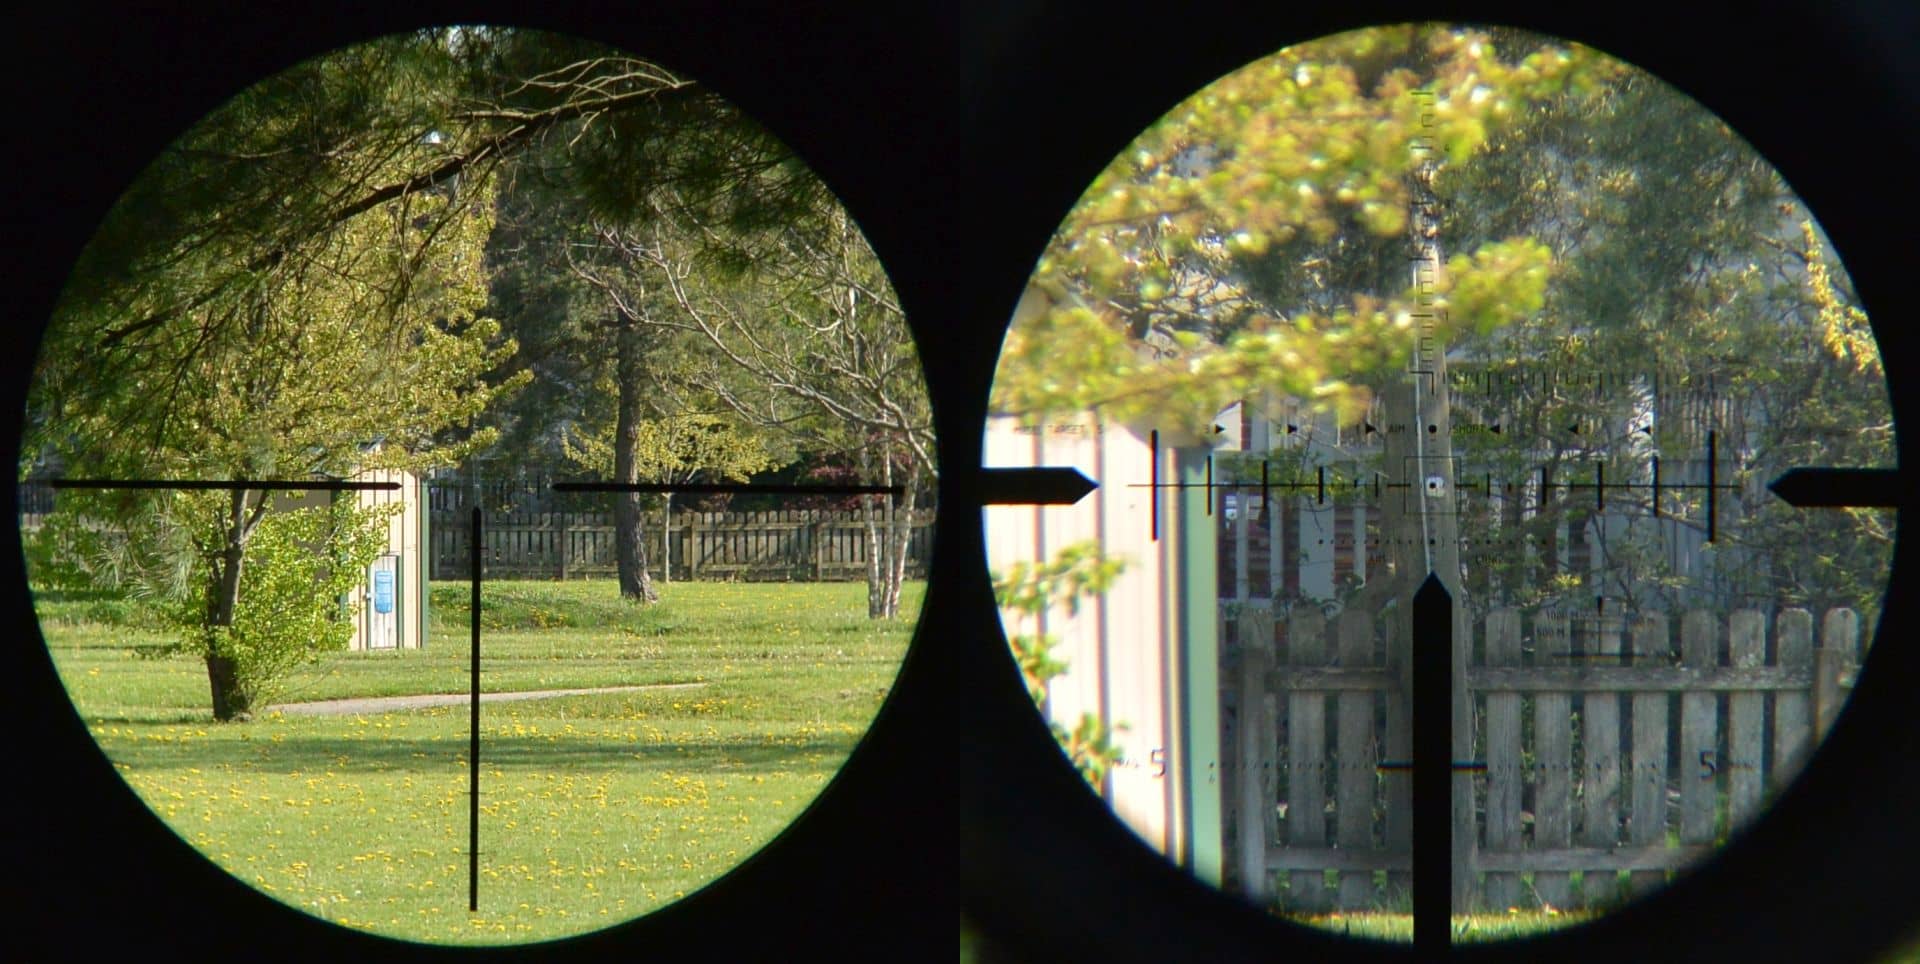 THLR reticle in the Minox ZP5 5-25x56 at low and high power